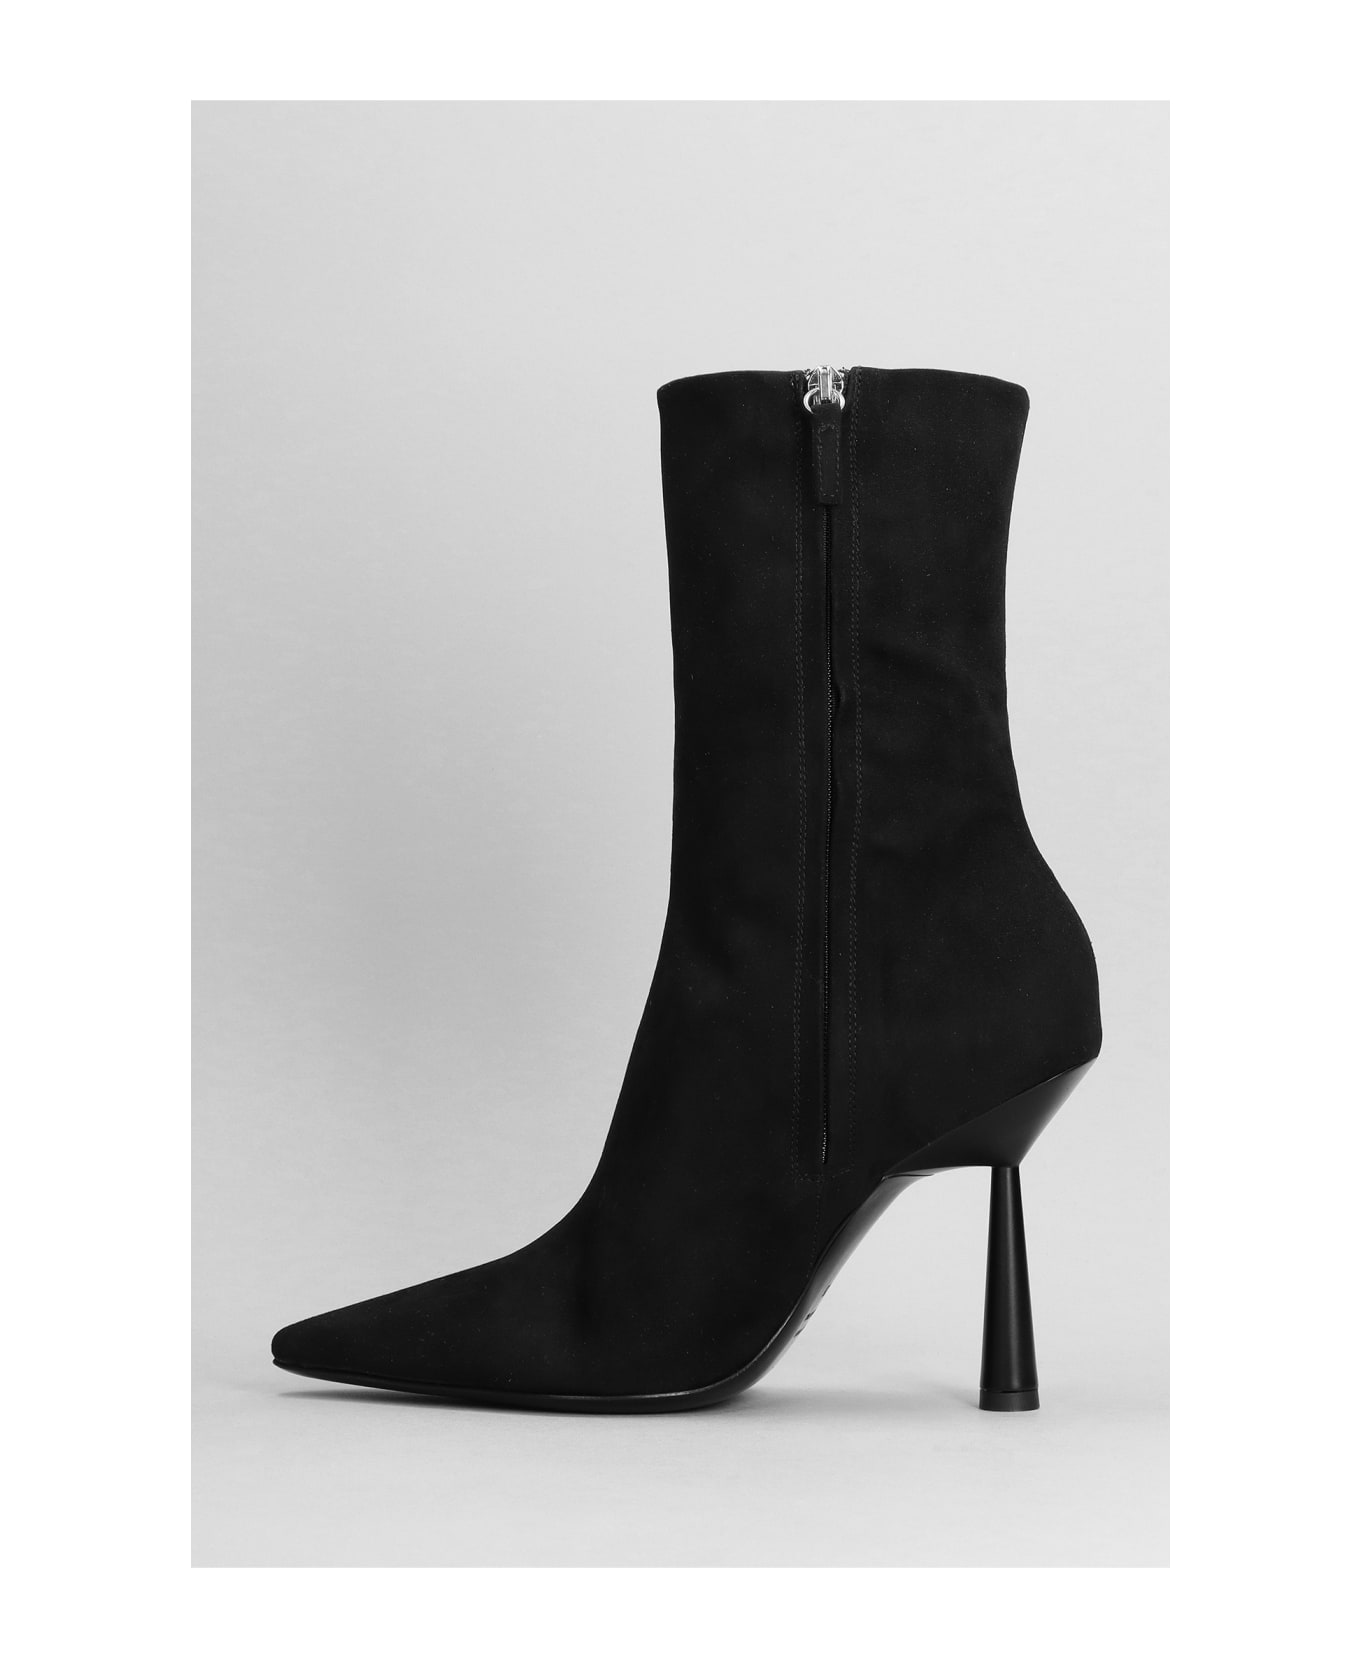 GIA BORGHINI Rhw7 High Heels Ankle Boots In Black Suede - black